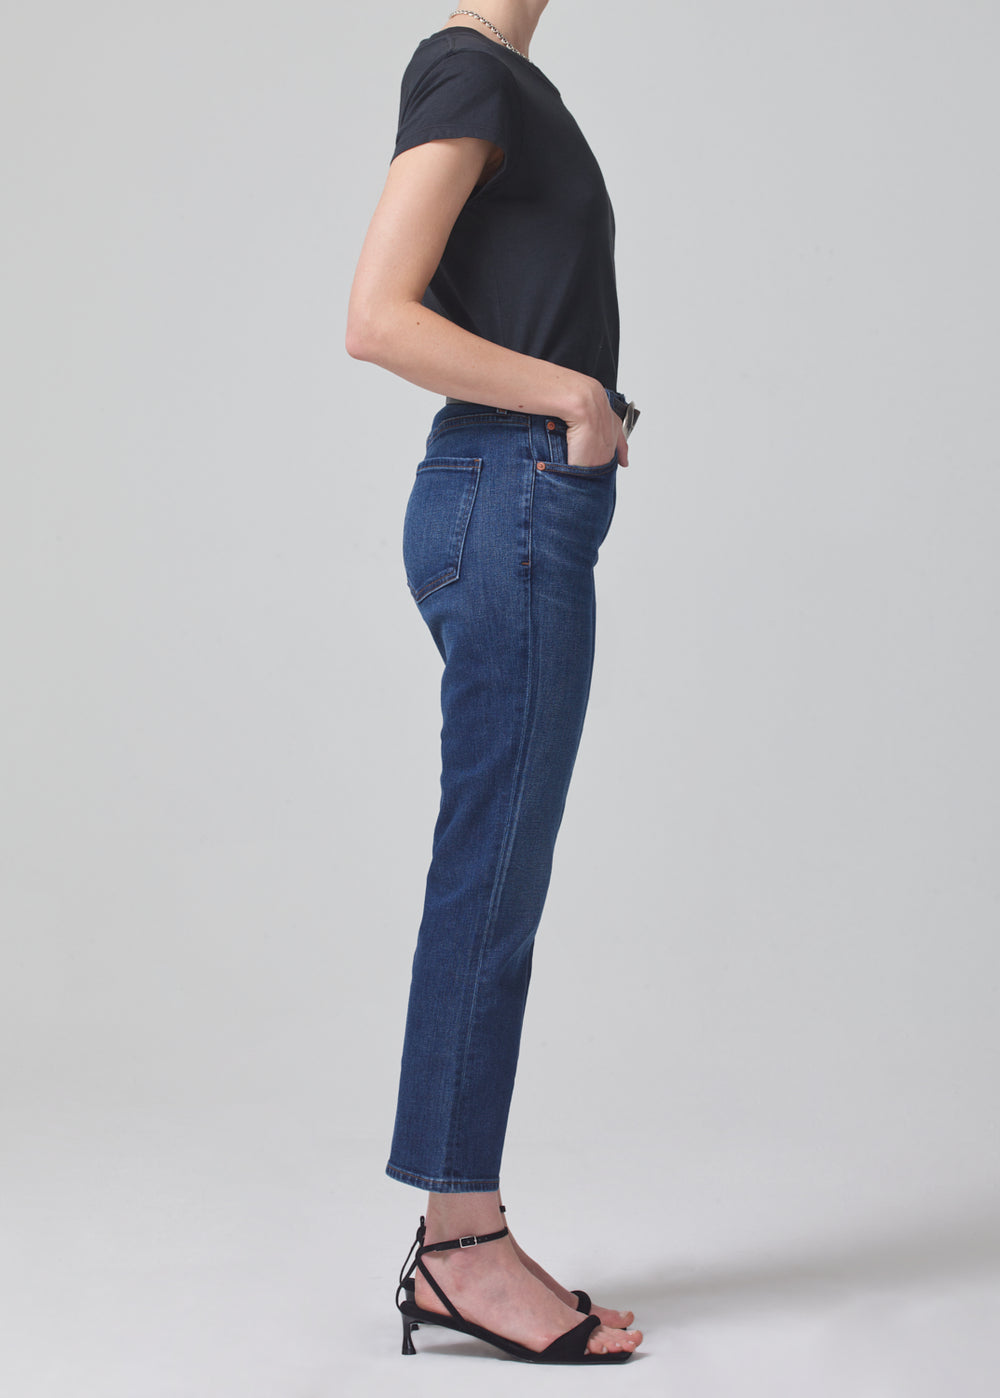 Citizens Of Humanity Isola Cropped Boot Cut Pant in Provance